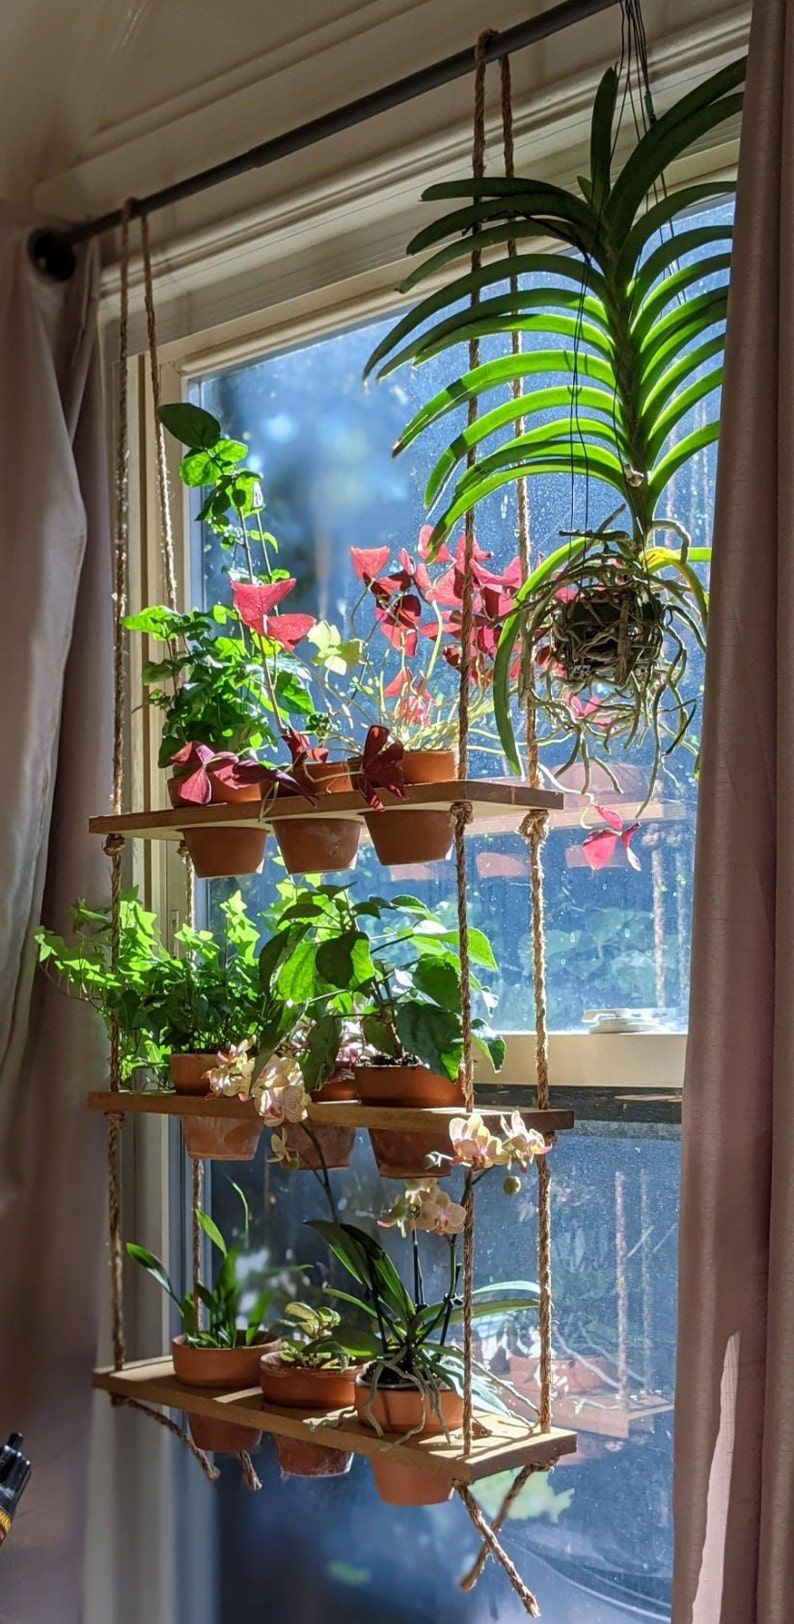 Hanging Plants Indoor The Perfect Way to Add Greenery to Your Home